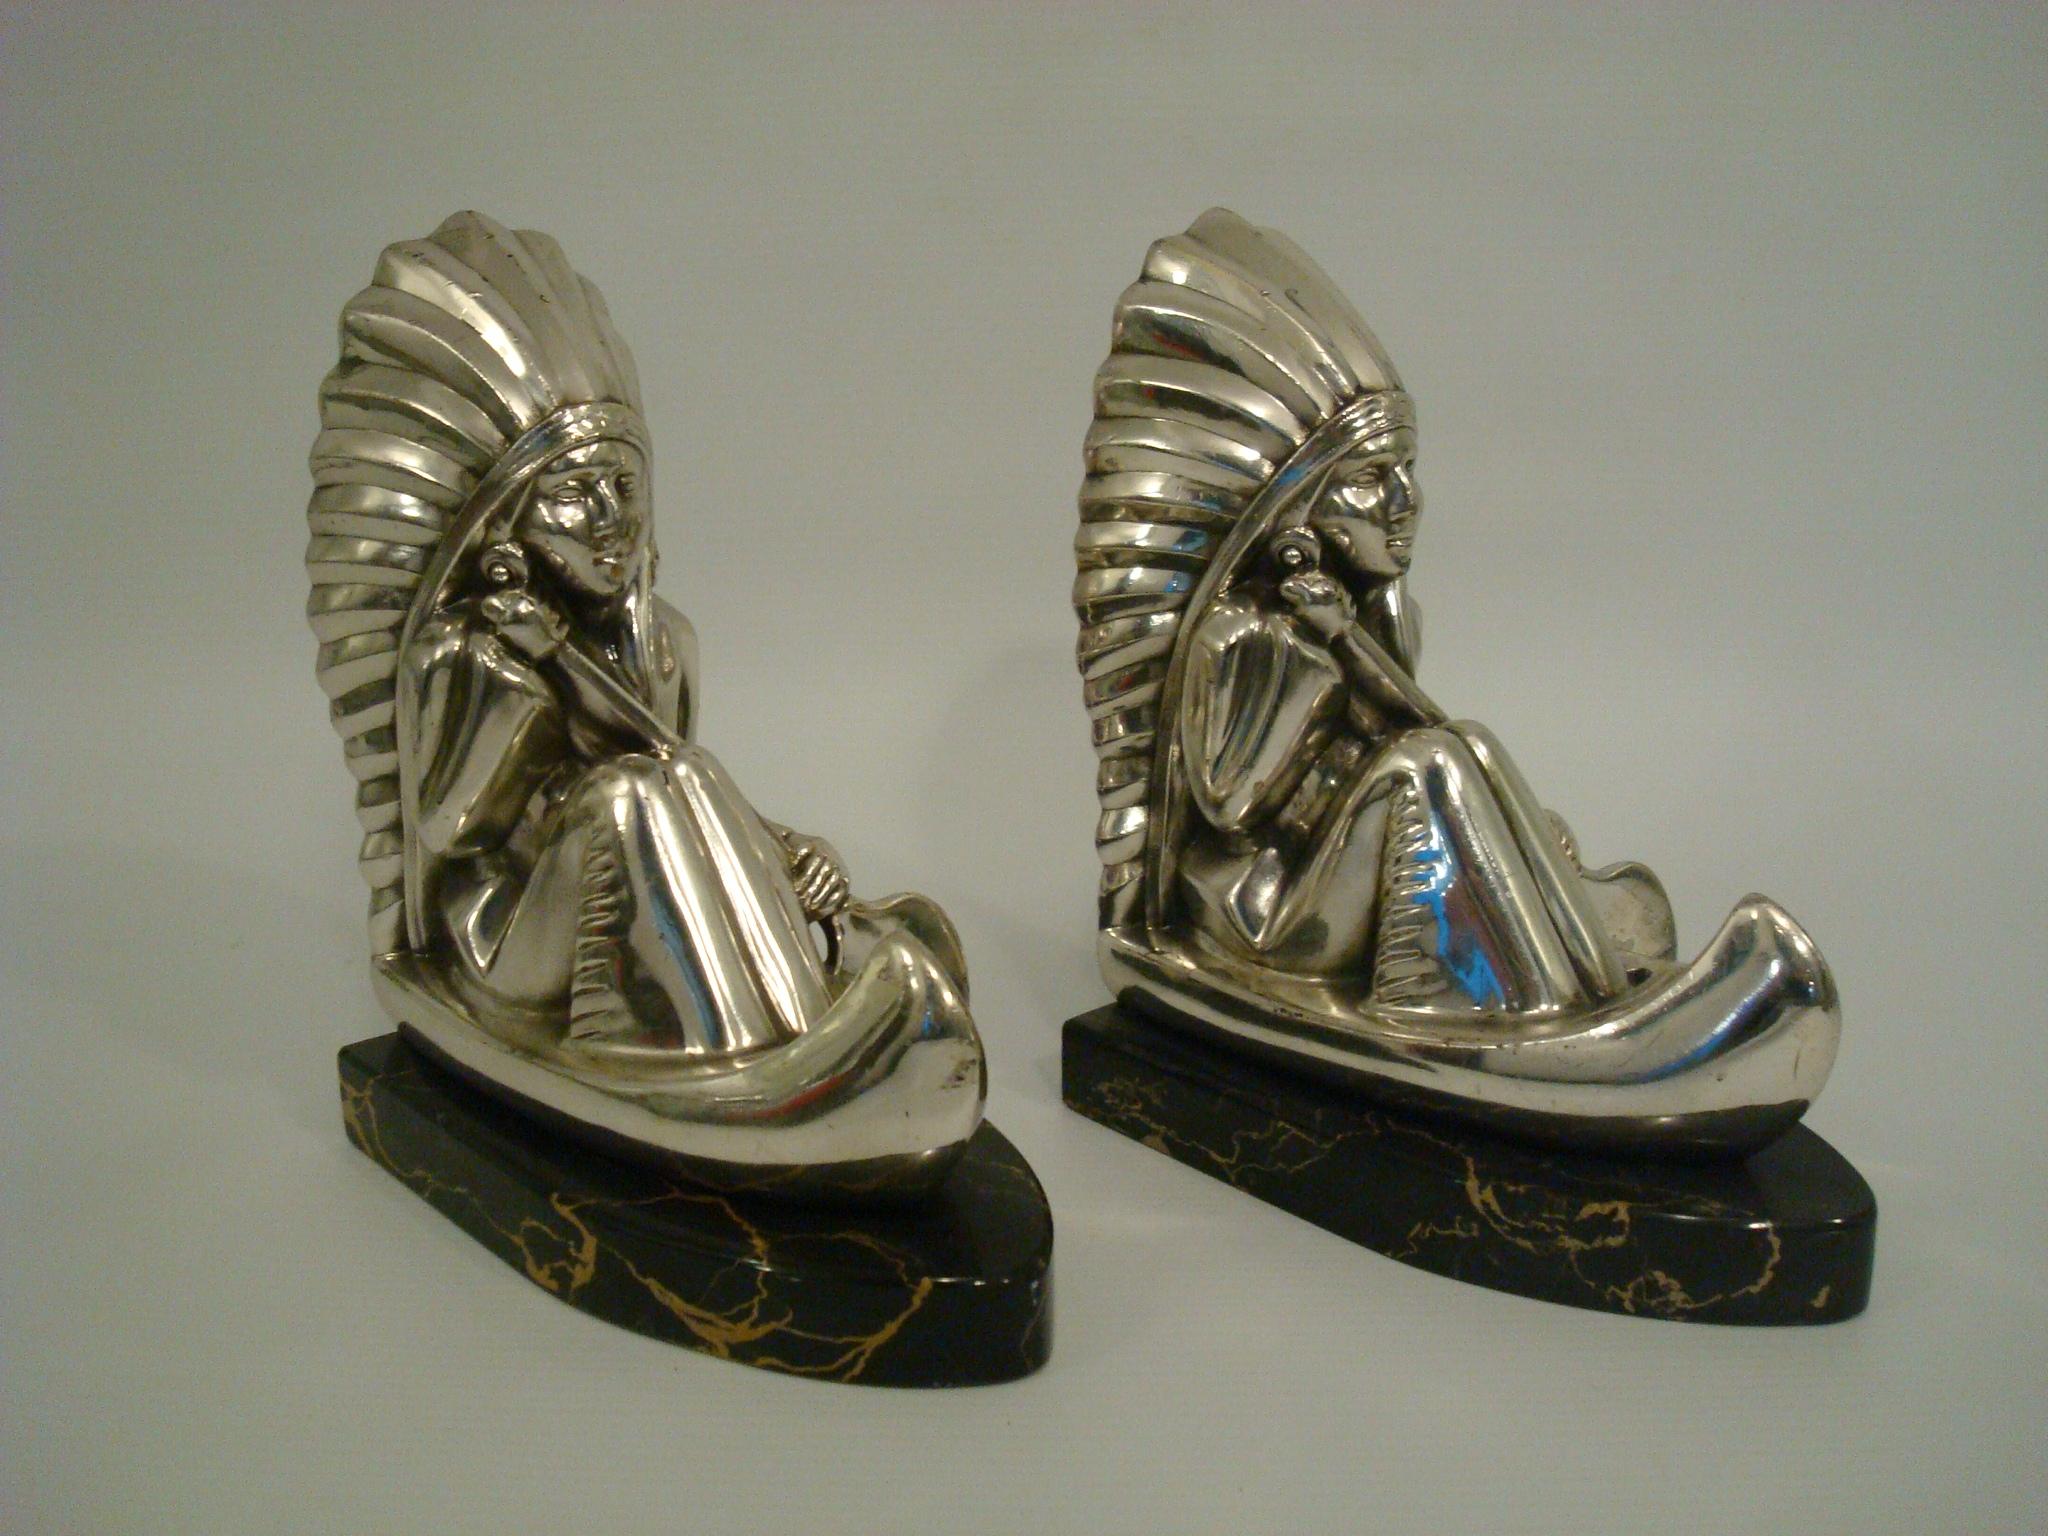 20th Century Art Deco Silvered Metal Natives Rowing Bookends